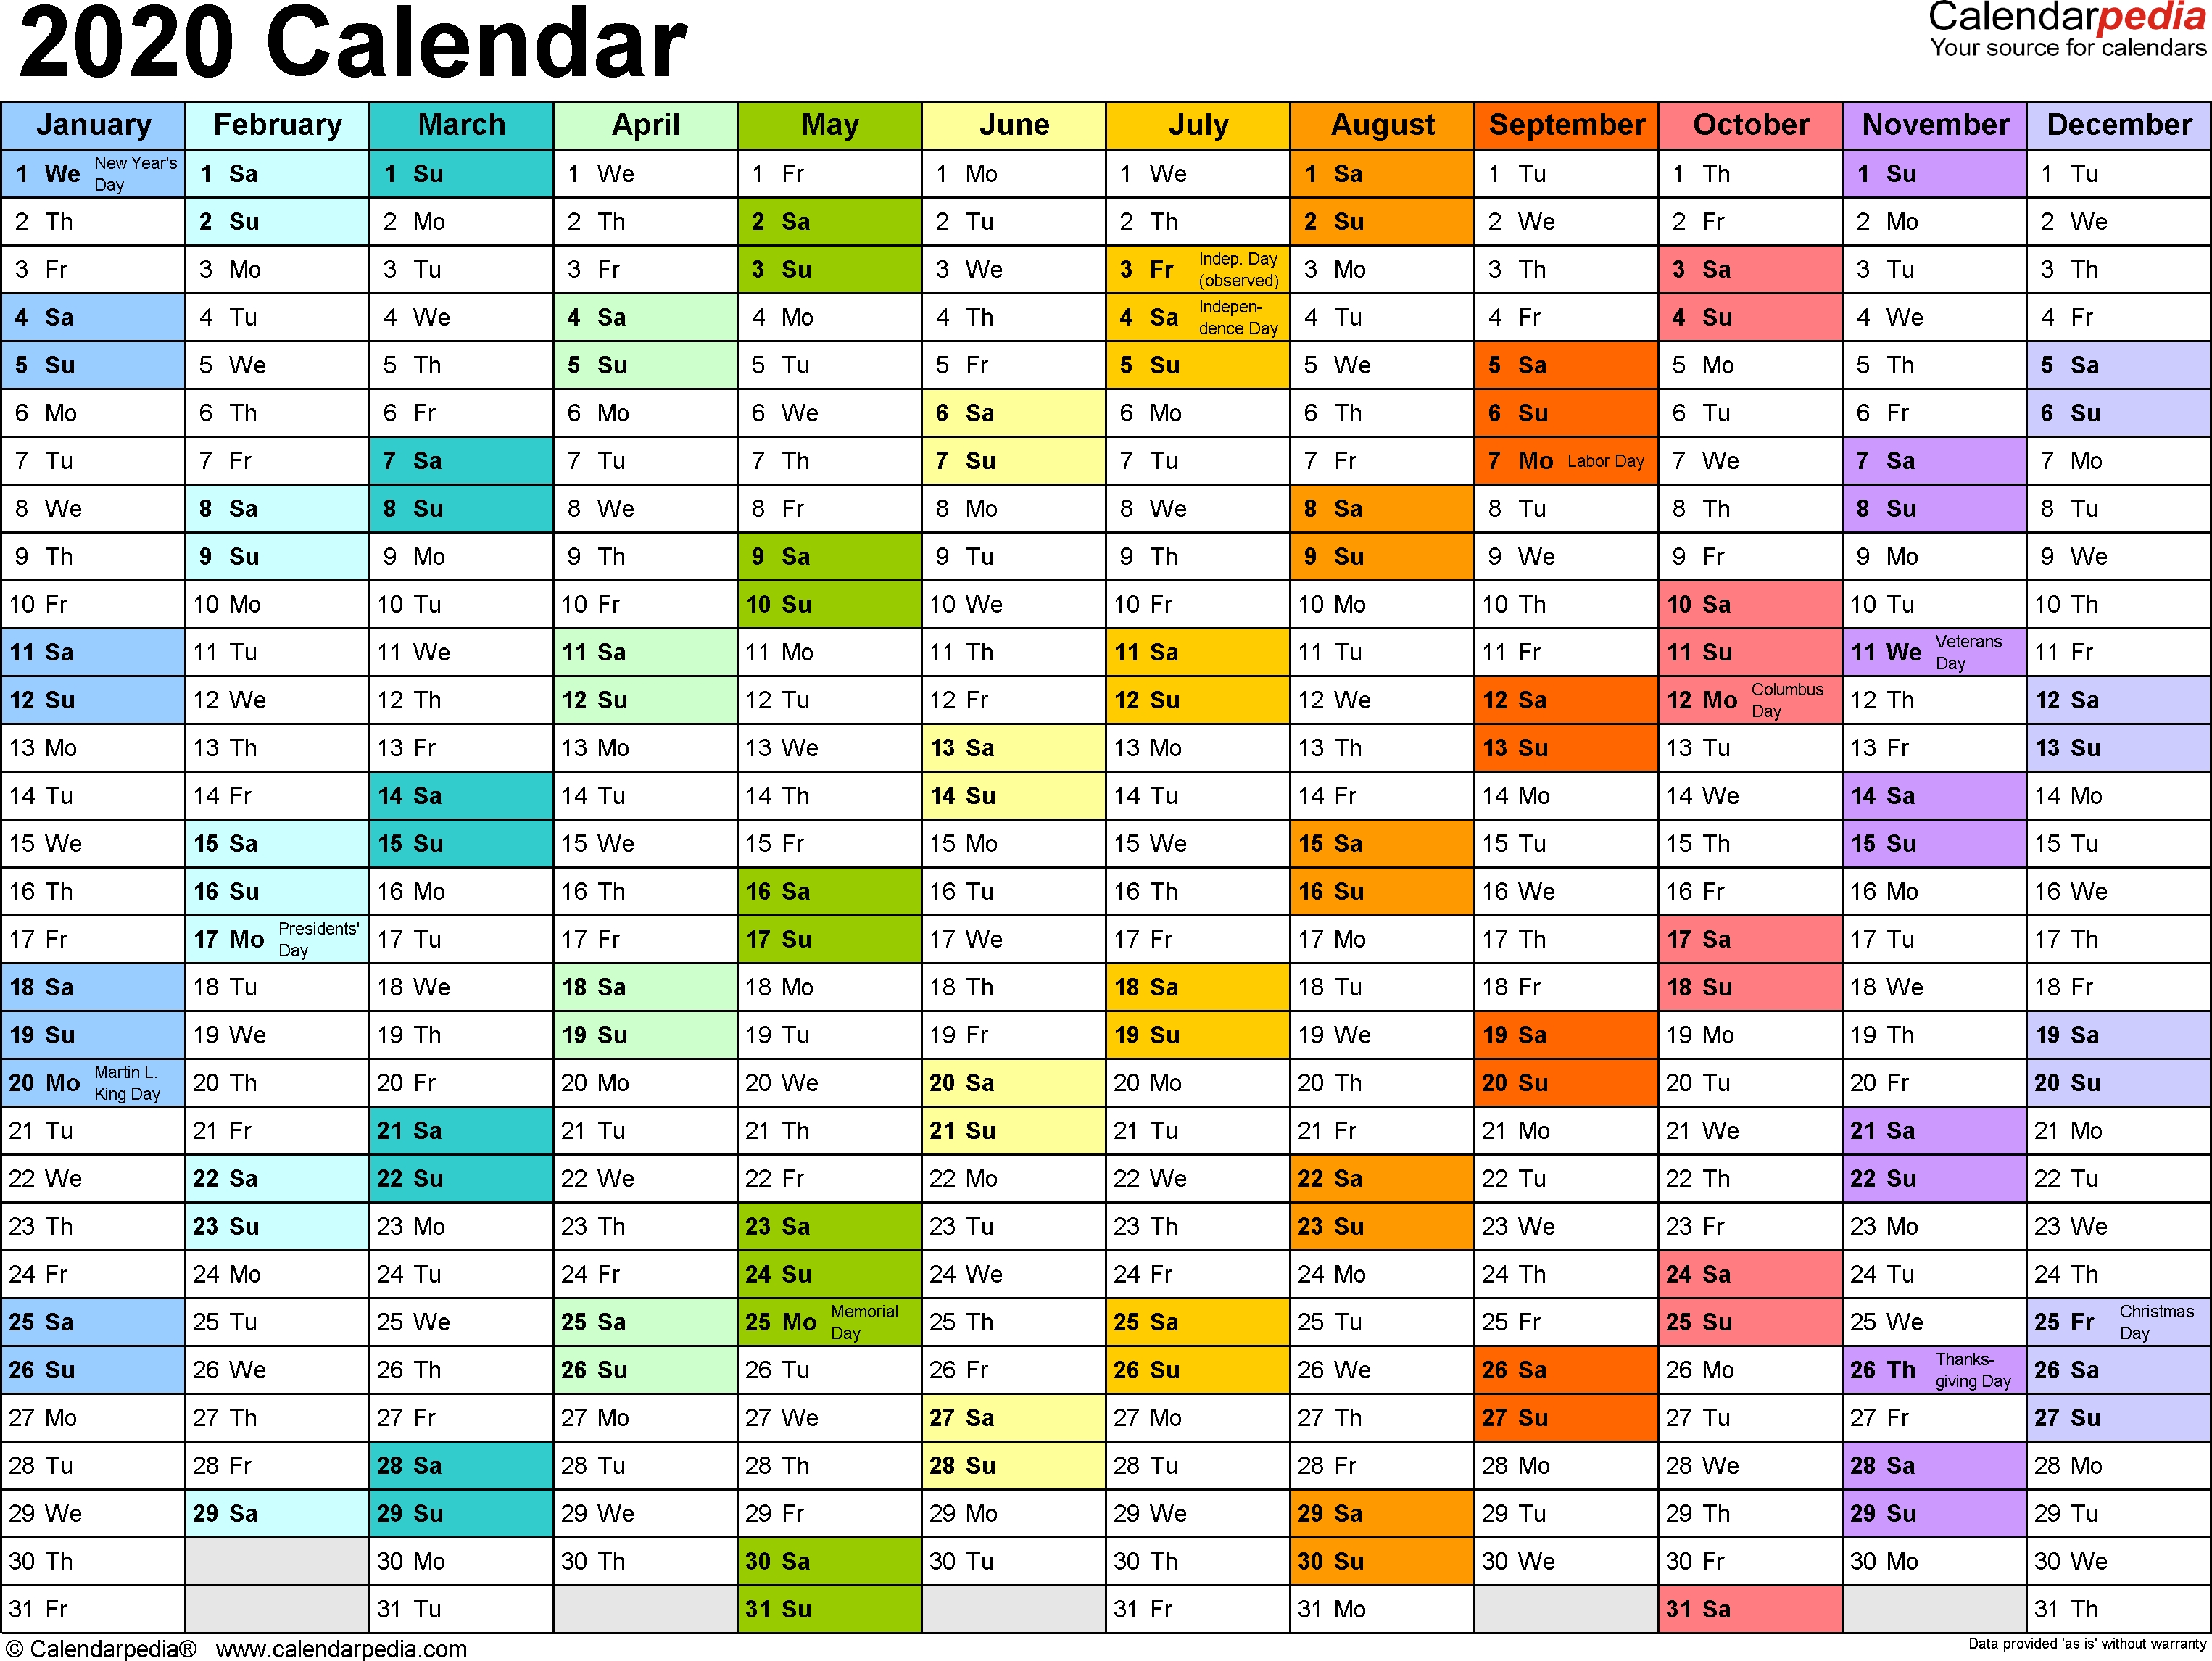 2020 Calendar - Download 18 Free Printable Excel Templates  2020/2020 Financial Year Planner